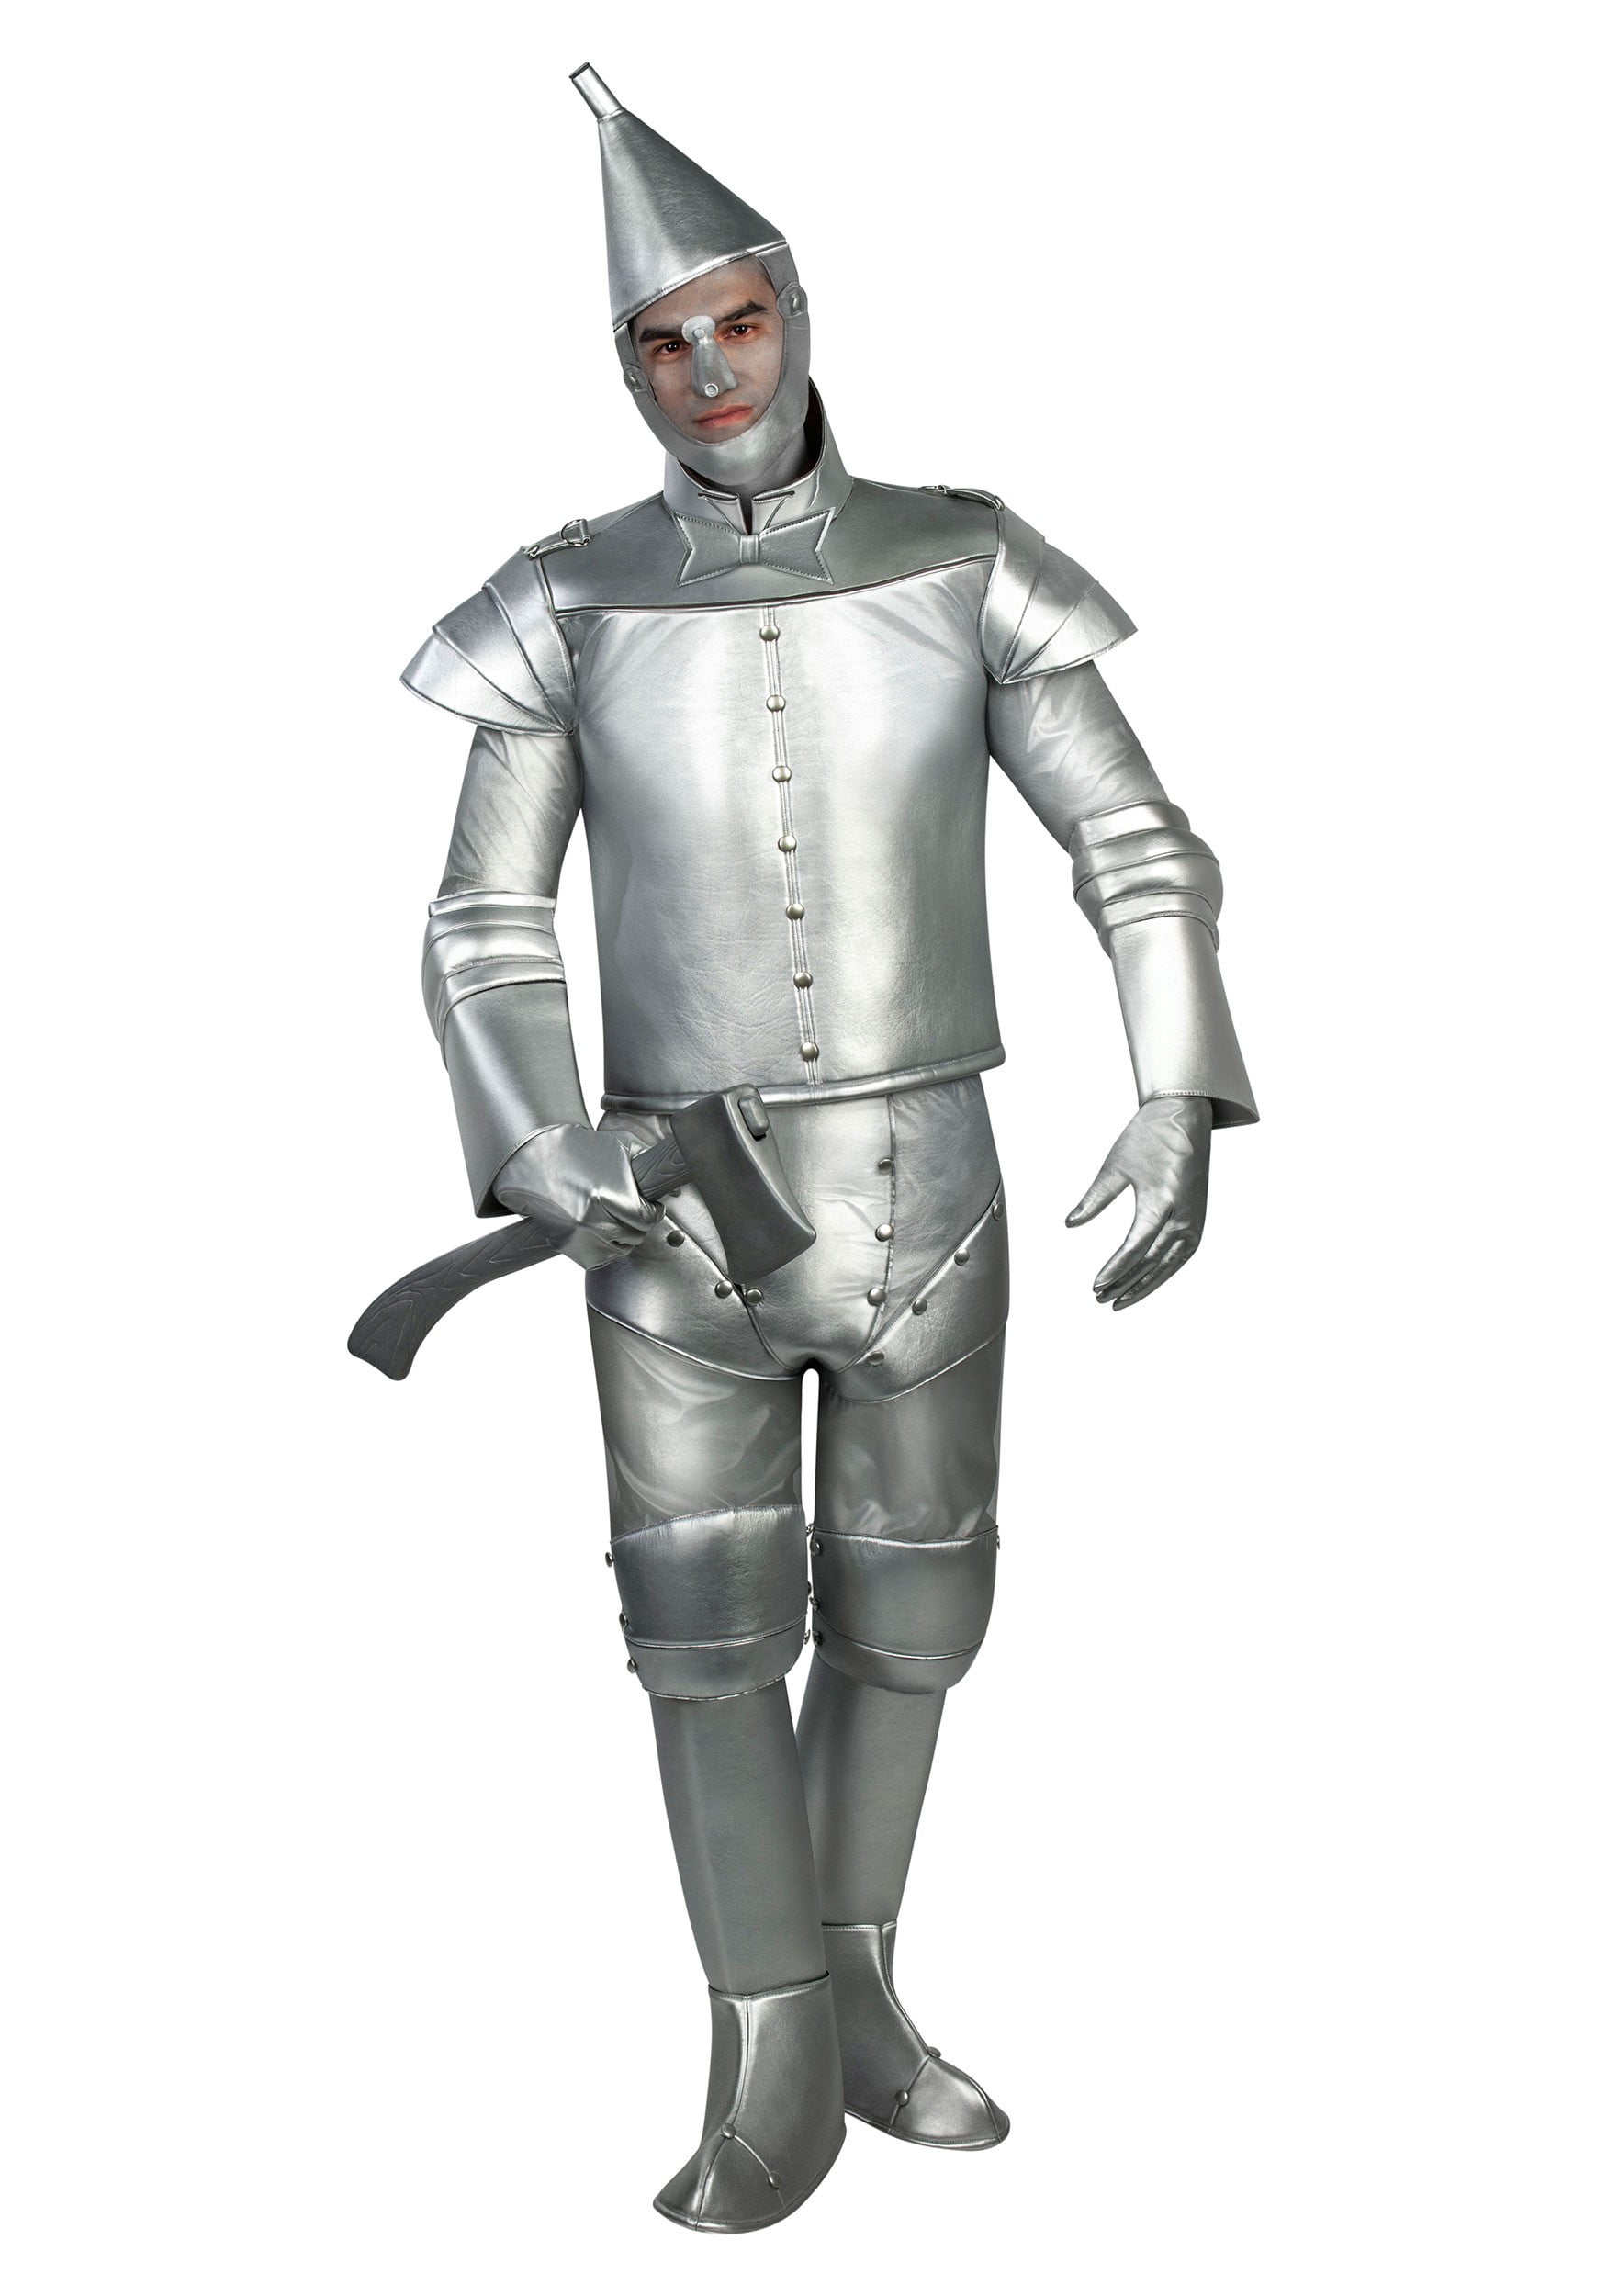 Halloween Tin Man The Wizard of Oz Kids Costume Party Luxury Dress Up for Girls